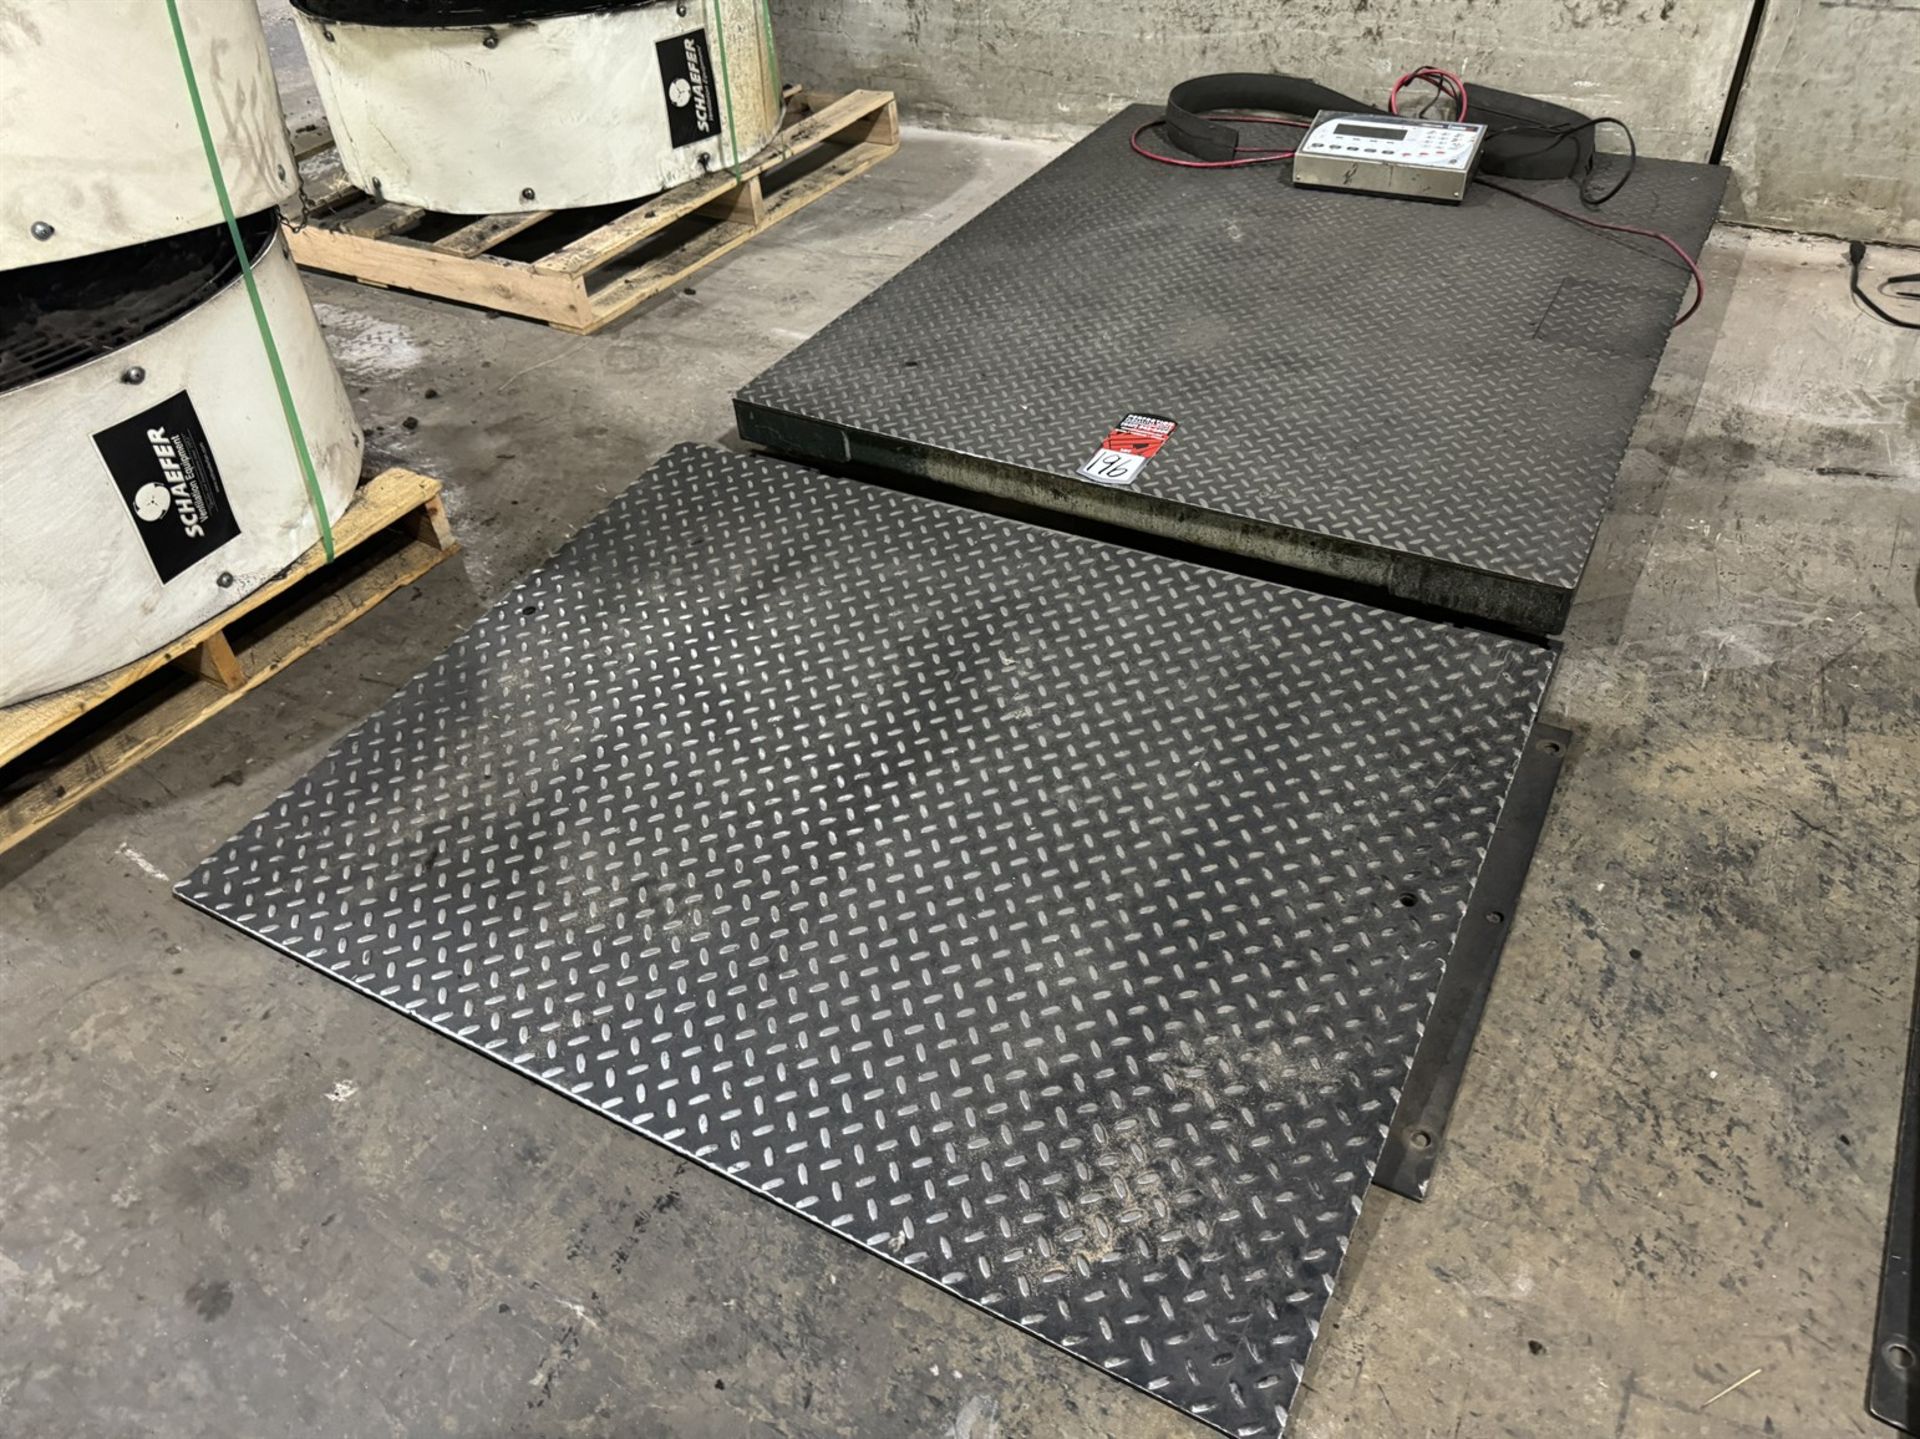 4' x 5' Floor Scale w/ Ramp and RICE LAKE Counterpart Digital Scale, 5000 Lb. Capacity